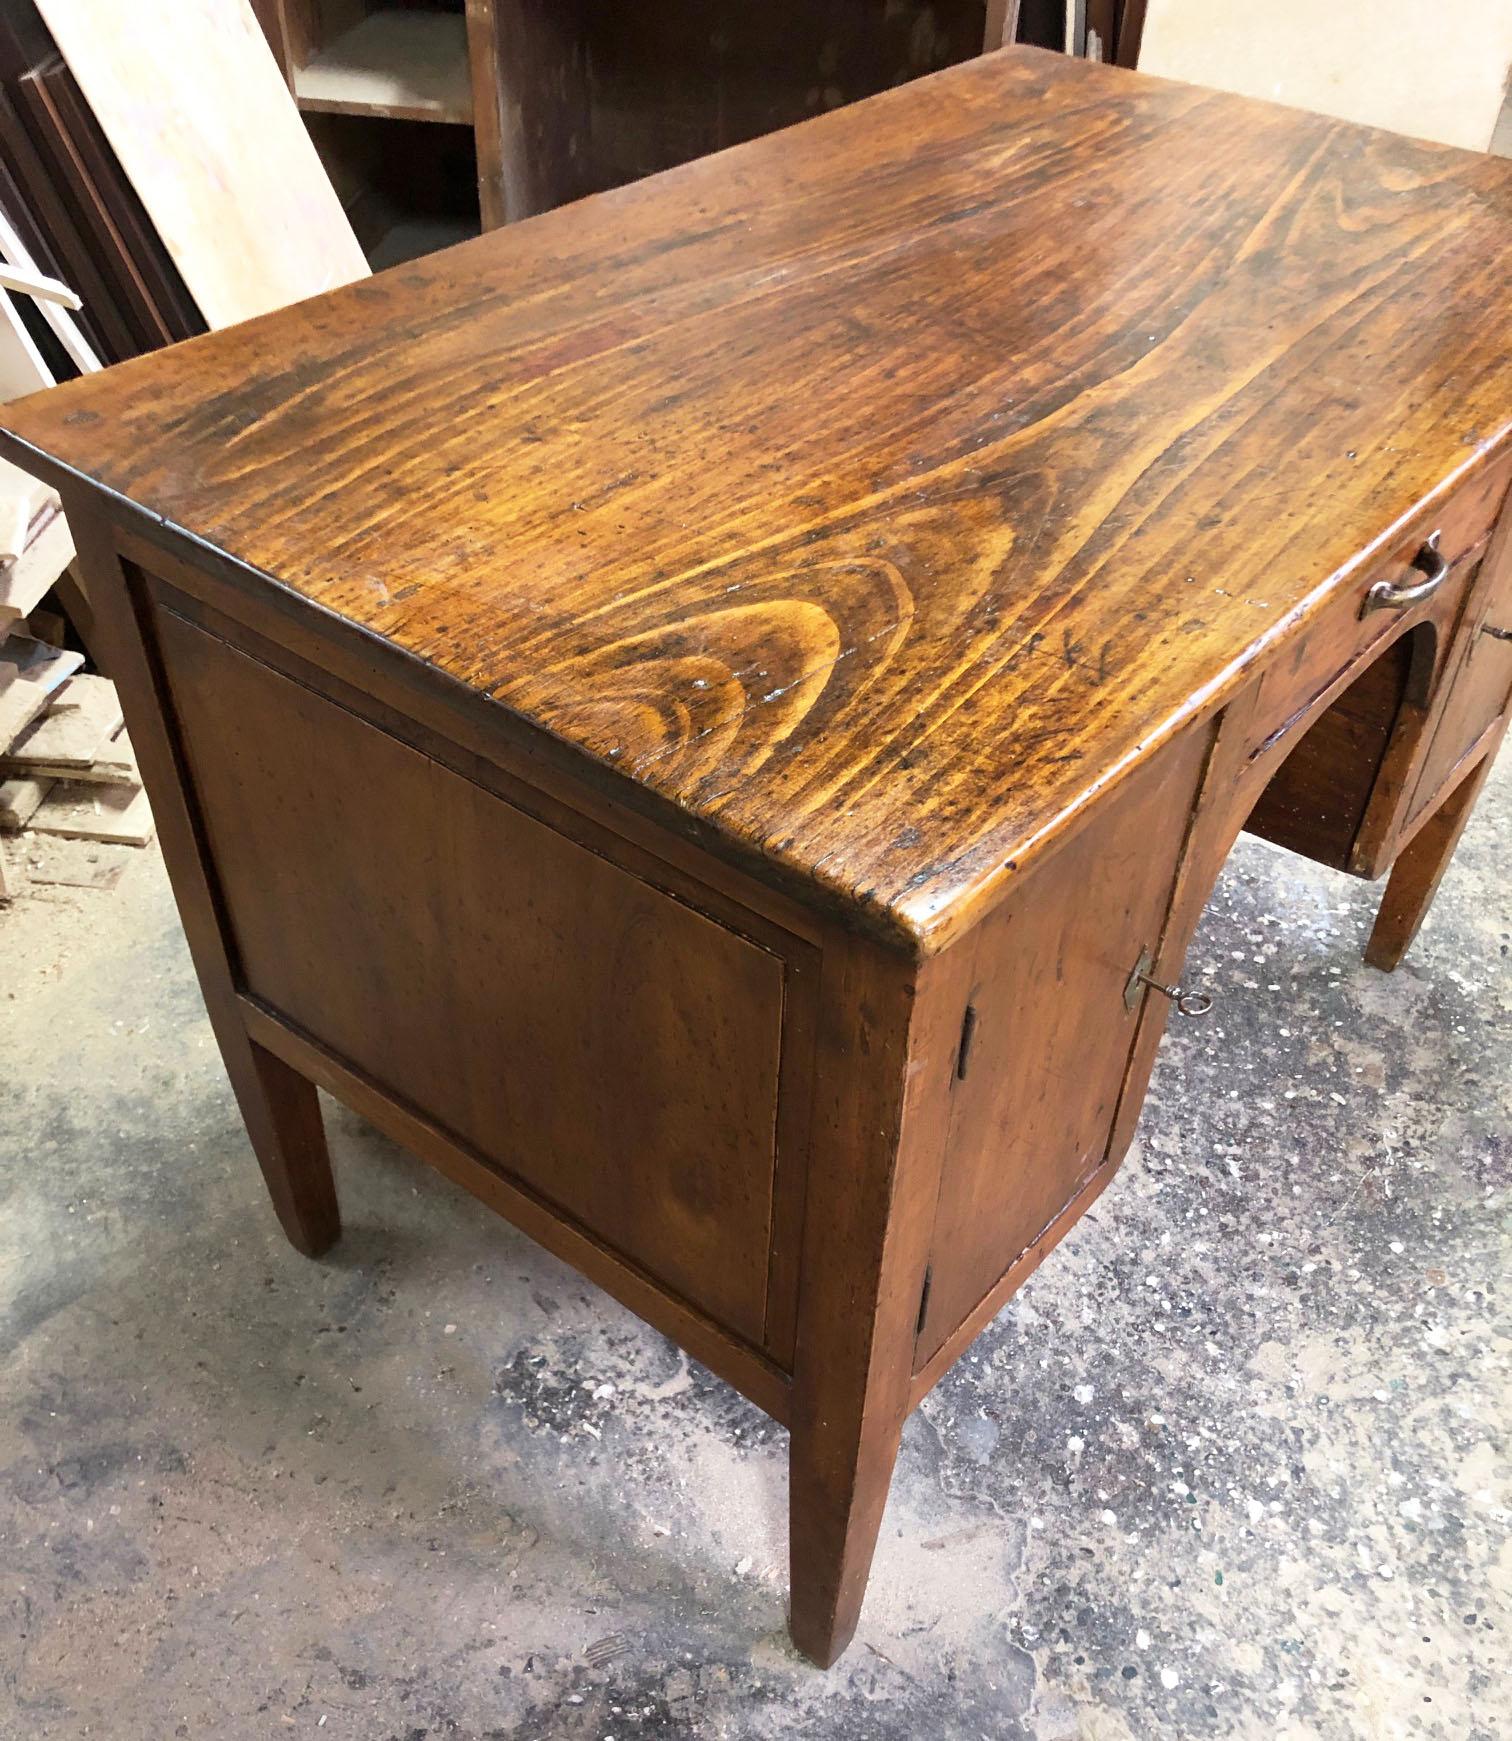 Antique desk, original Italian 20th.  in poplar, with a central drawer and two side doors.
Original honey color, very well maintained.
It is sturdy and heavy.
The desk is very practical, it will be your comfortable office.
Comes from an old country